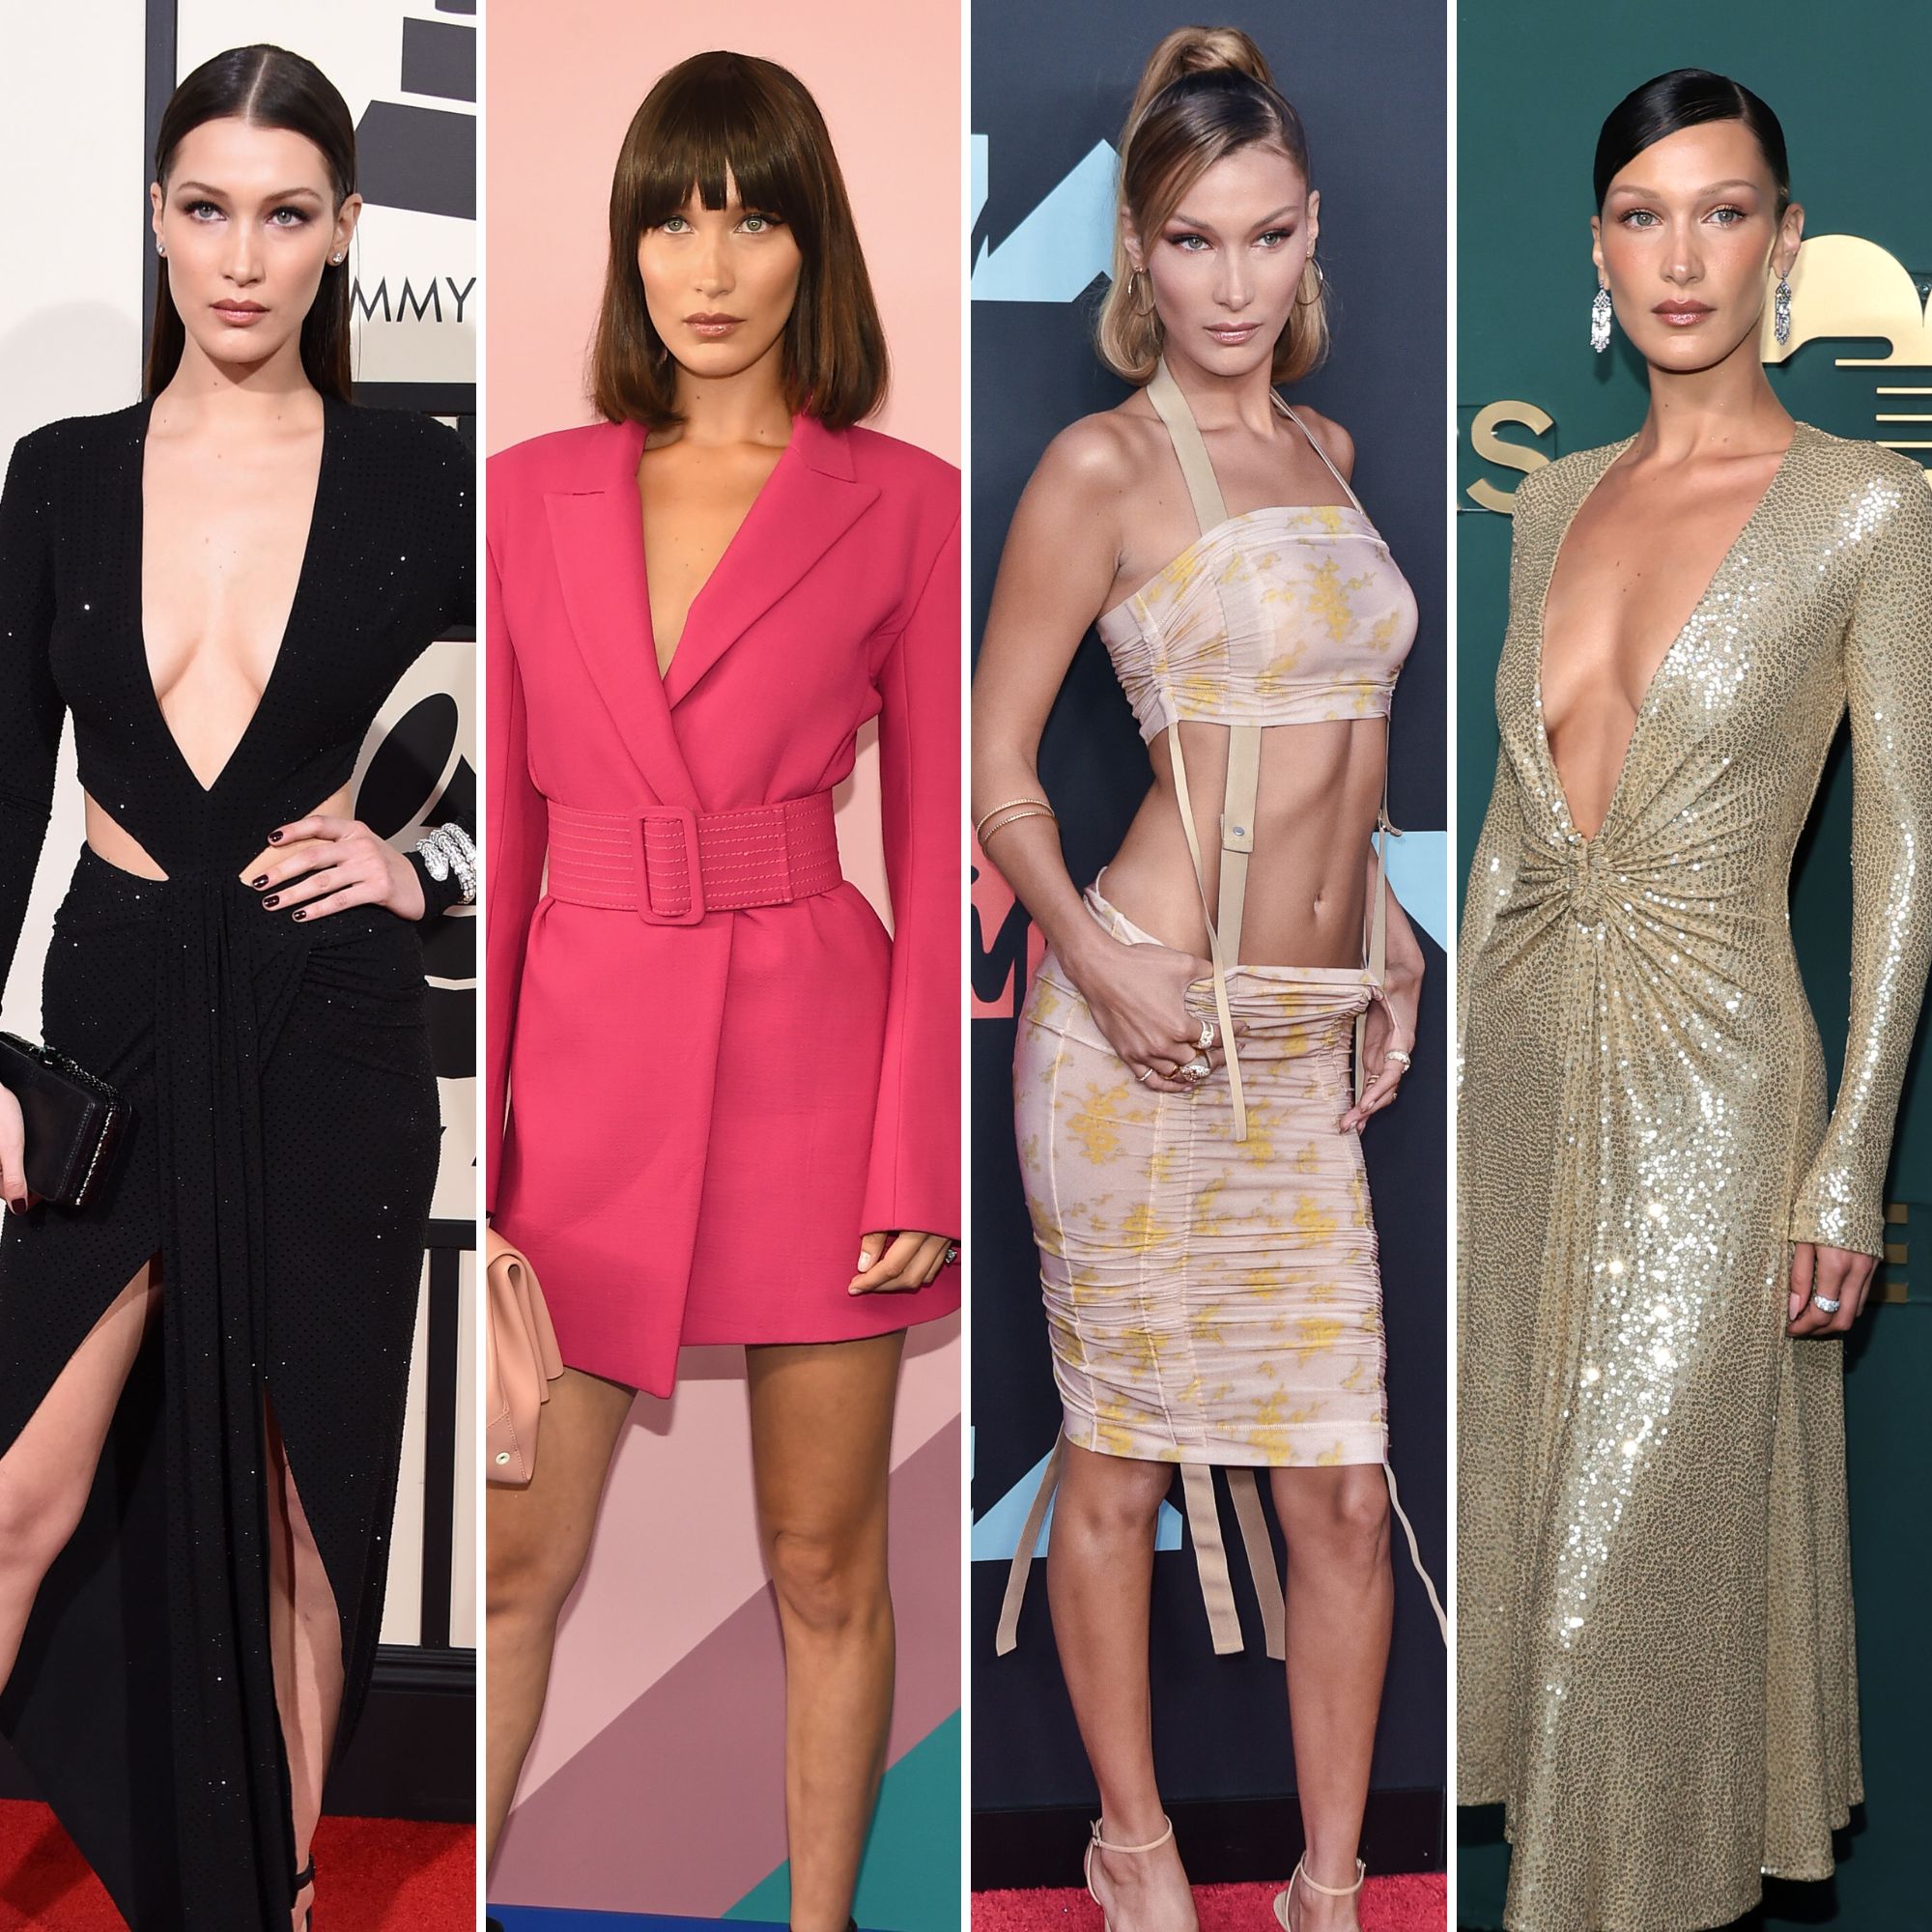 Celebrity fashion: The latest style from the red carpet - Foto 1